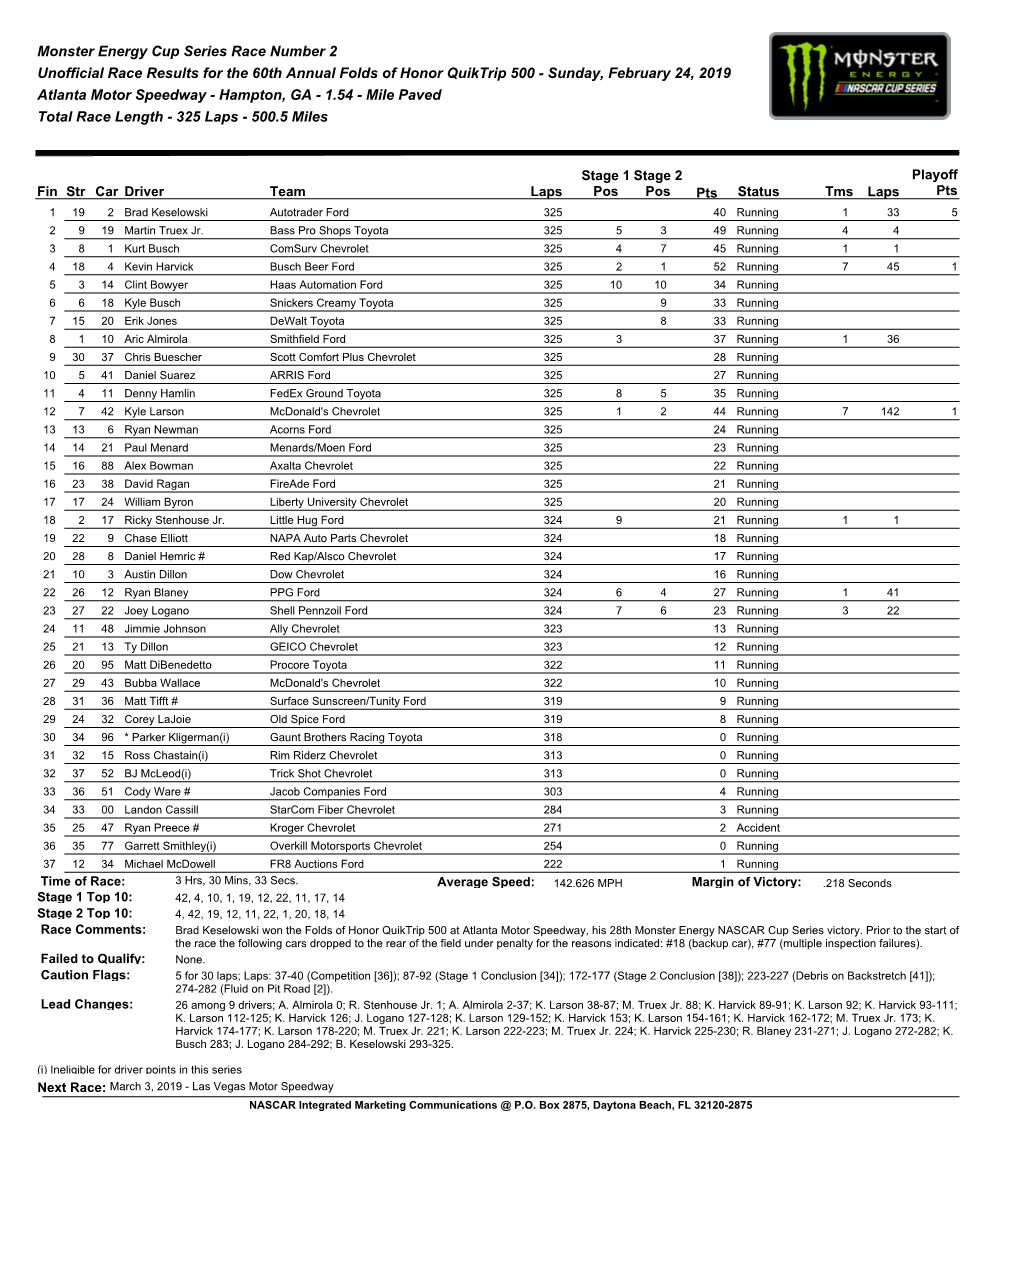 Monster Energy Cup Series Race Number 2 Unofficial Race Results